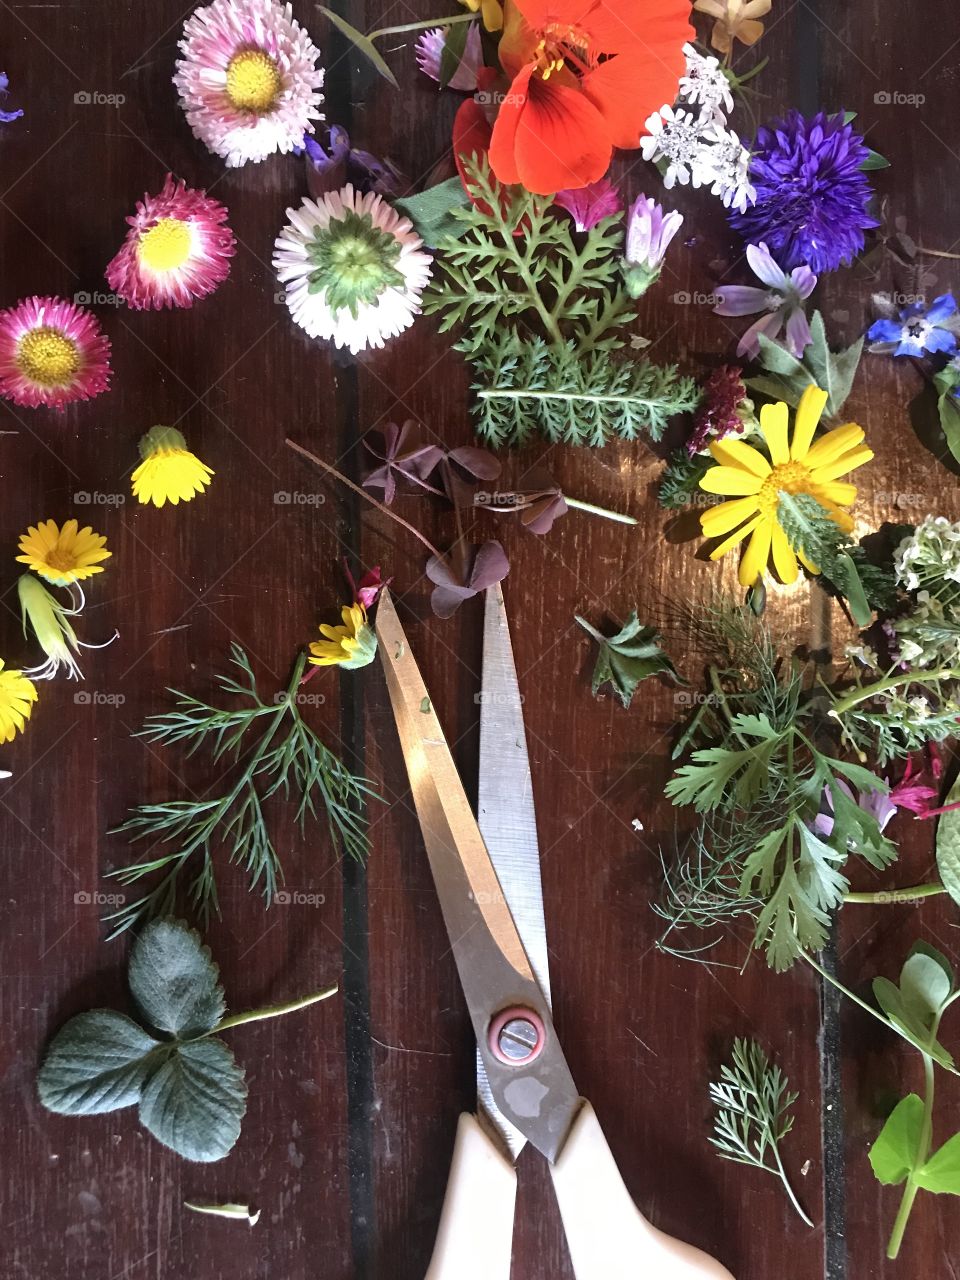 Crafting with spring flowers and leaves.  Making pressed flowers